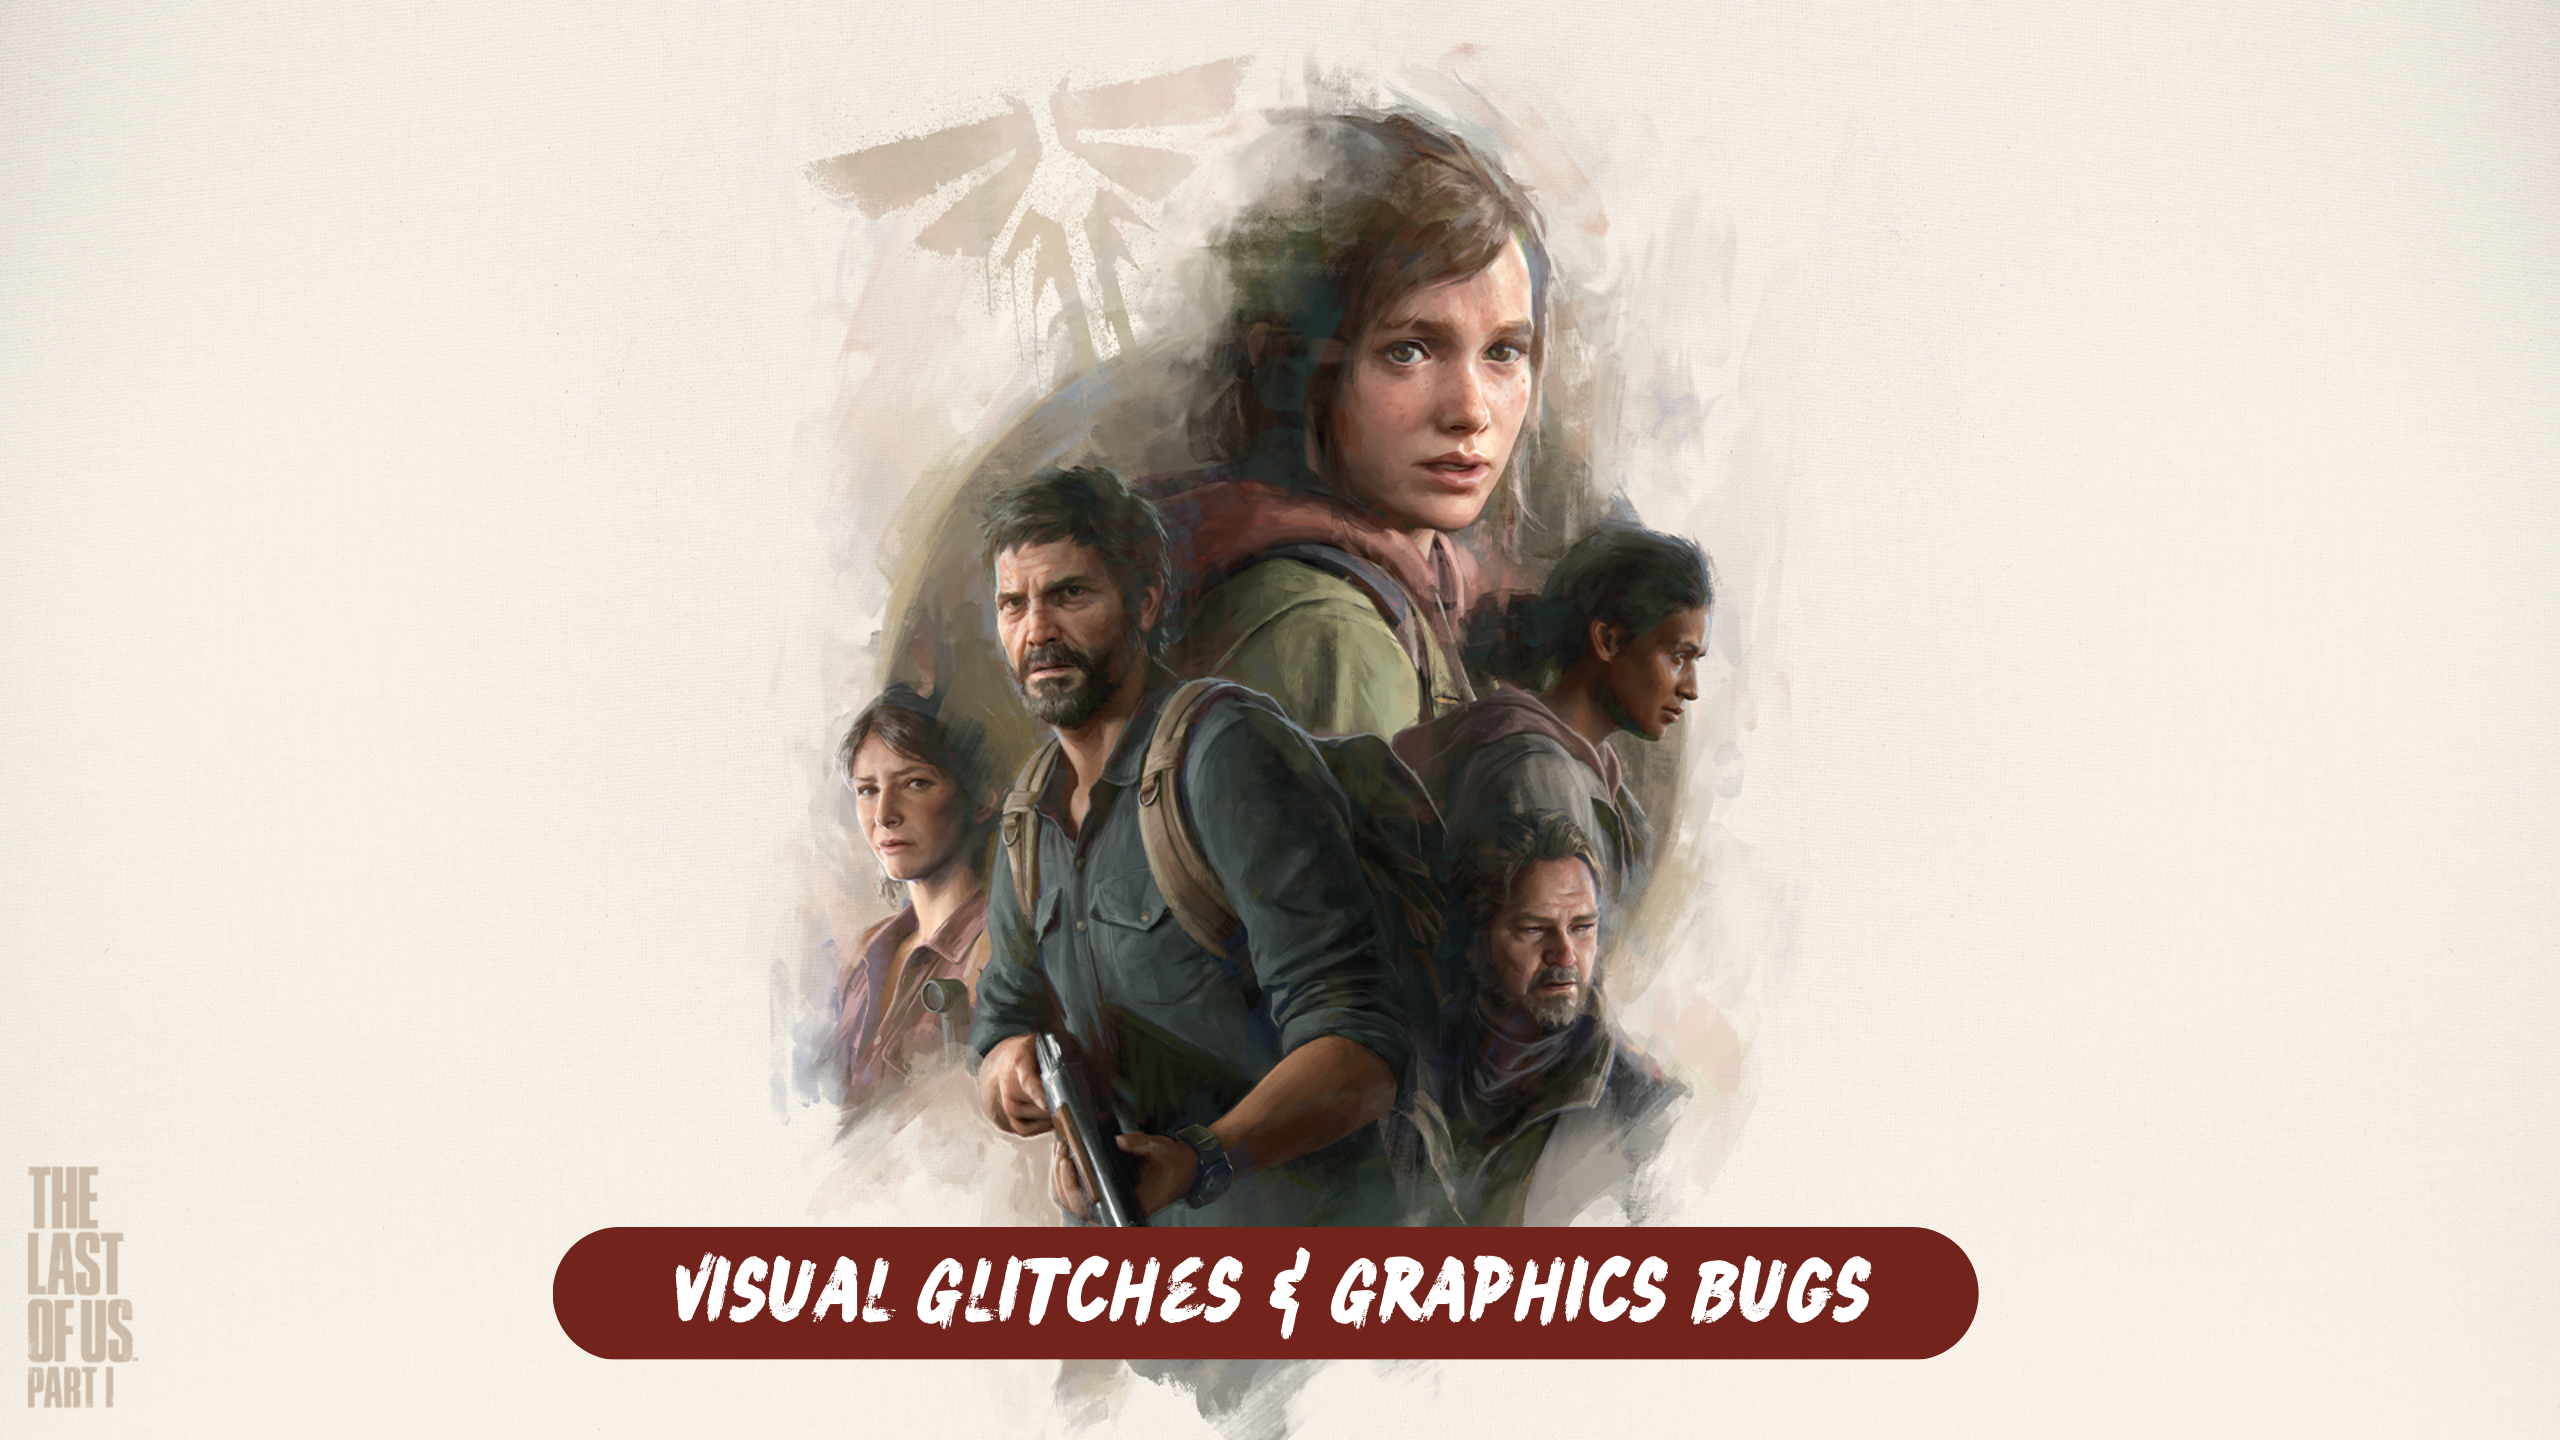 The Last of Us PC - BUGS & GLITCHES 